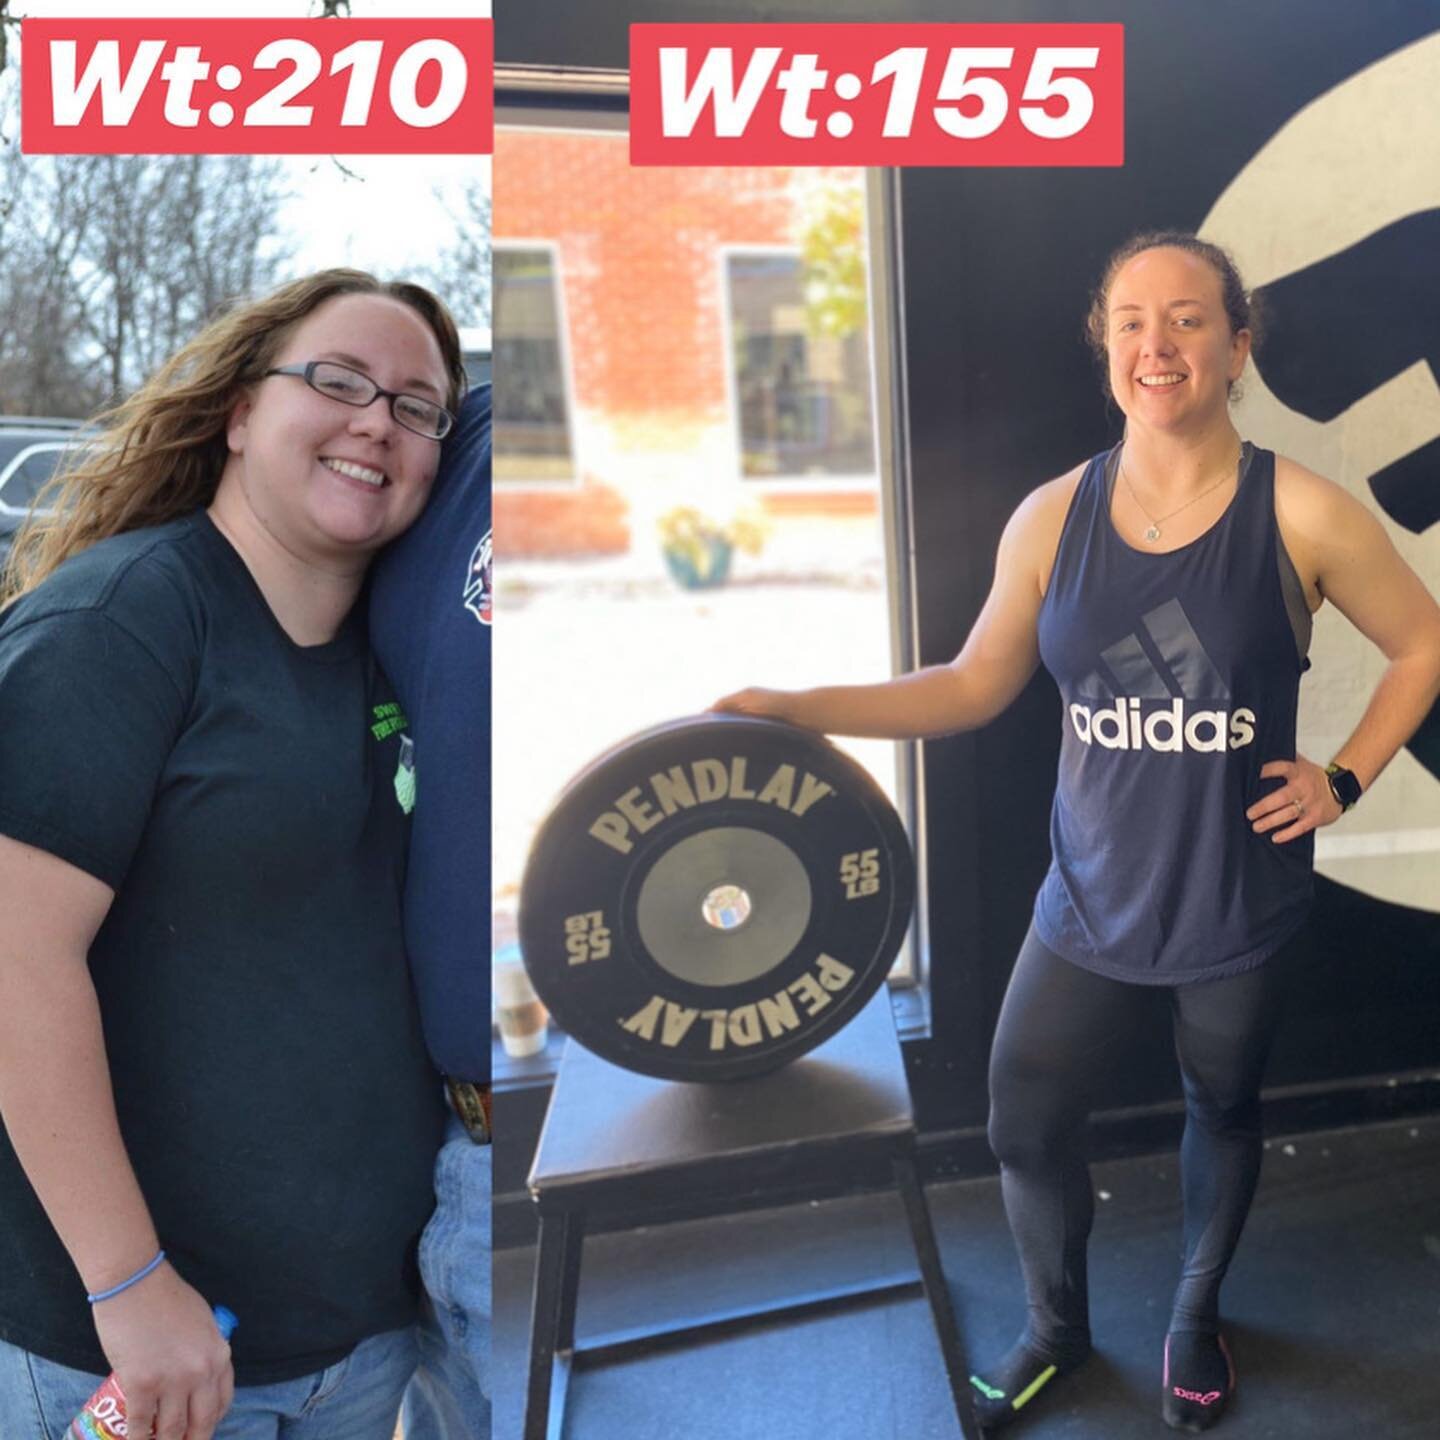 Shout out to my homey, client and @firehouseabilene member @bcknowles . She started with me a year ago when her BFF @jazzyrader22 started bringing her to sessions. We had her stand next to a 55lb weight to represent what she was carrying around daily